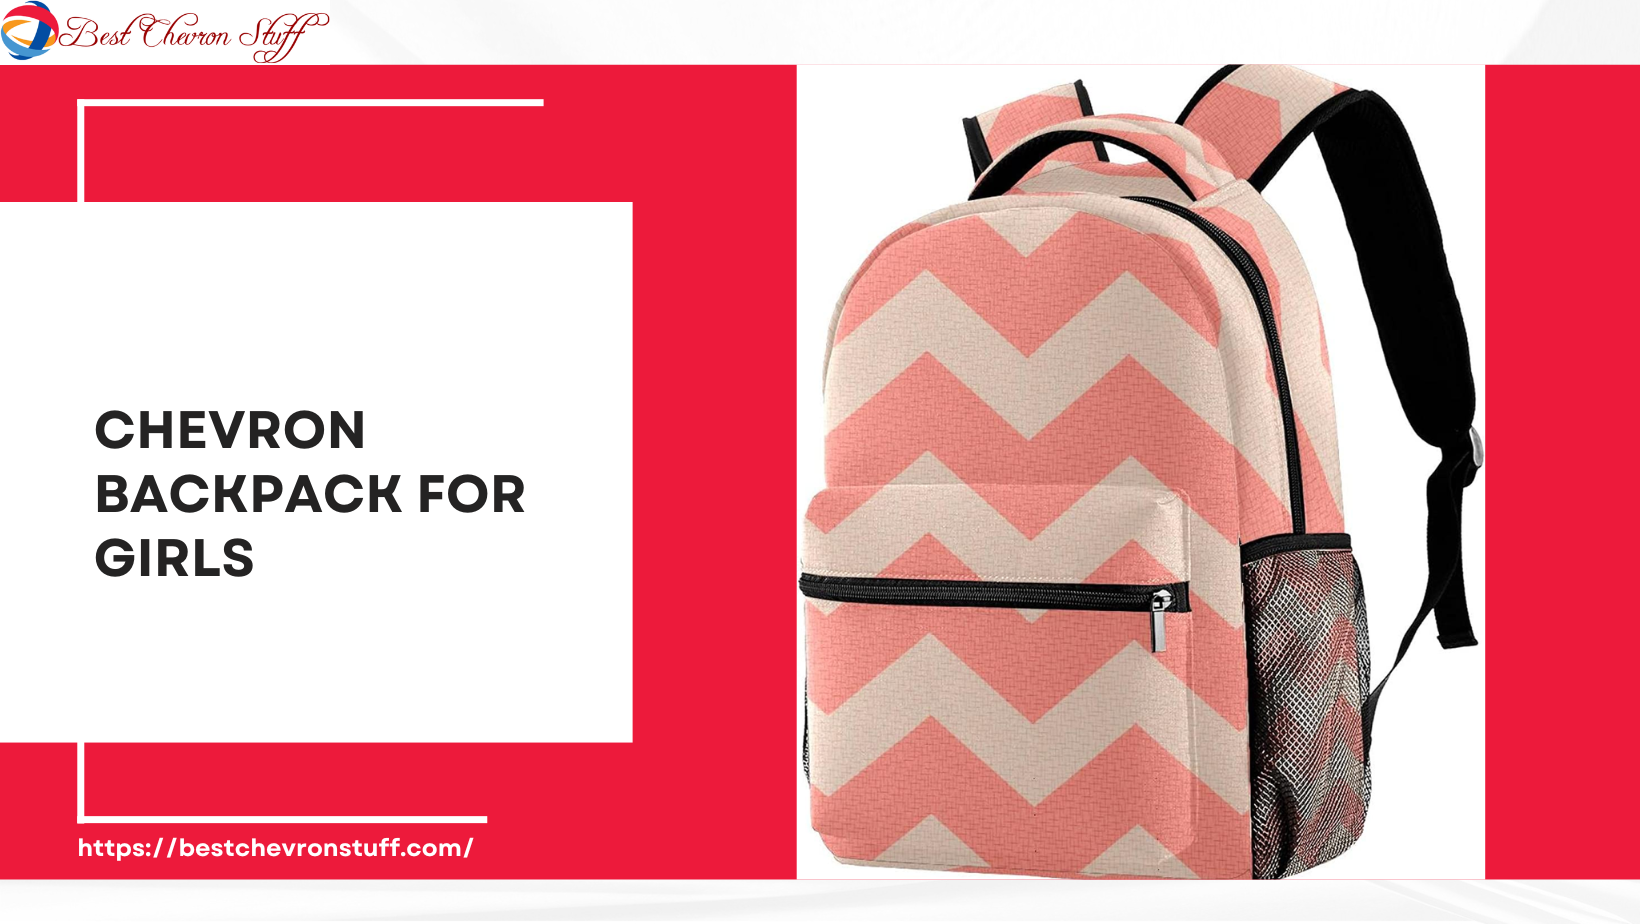 Best Chevron Backpacks for Girls | Aqua, Pink, Black and White, Purple, Blue, Teal, Red, Green and More!